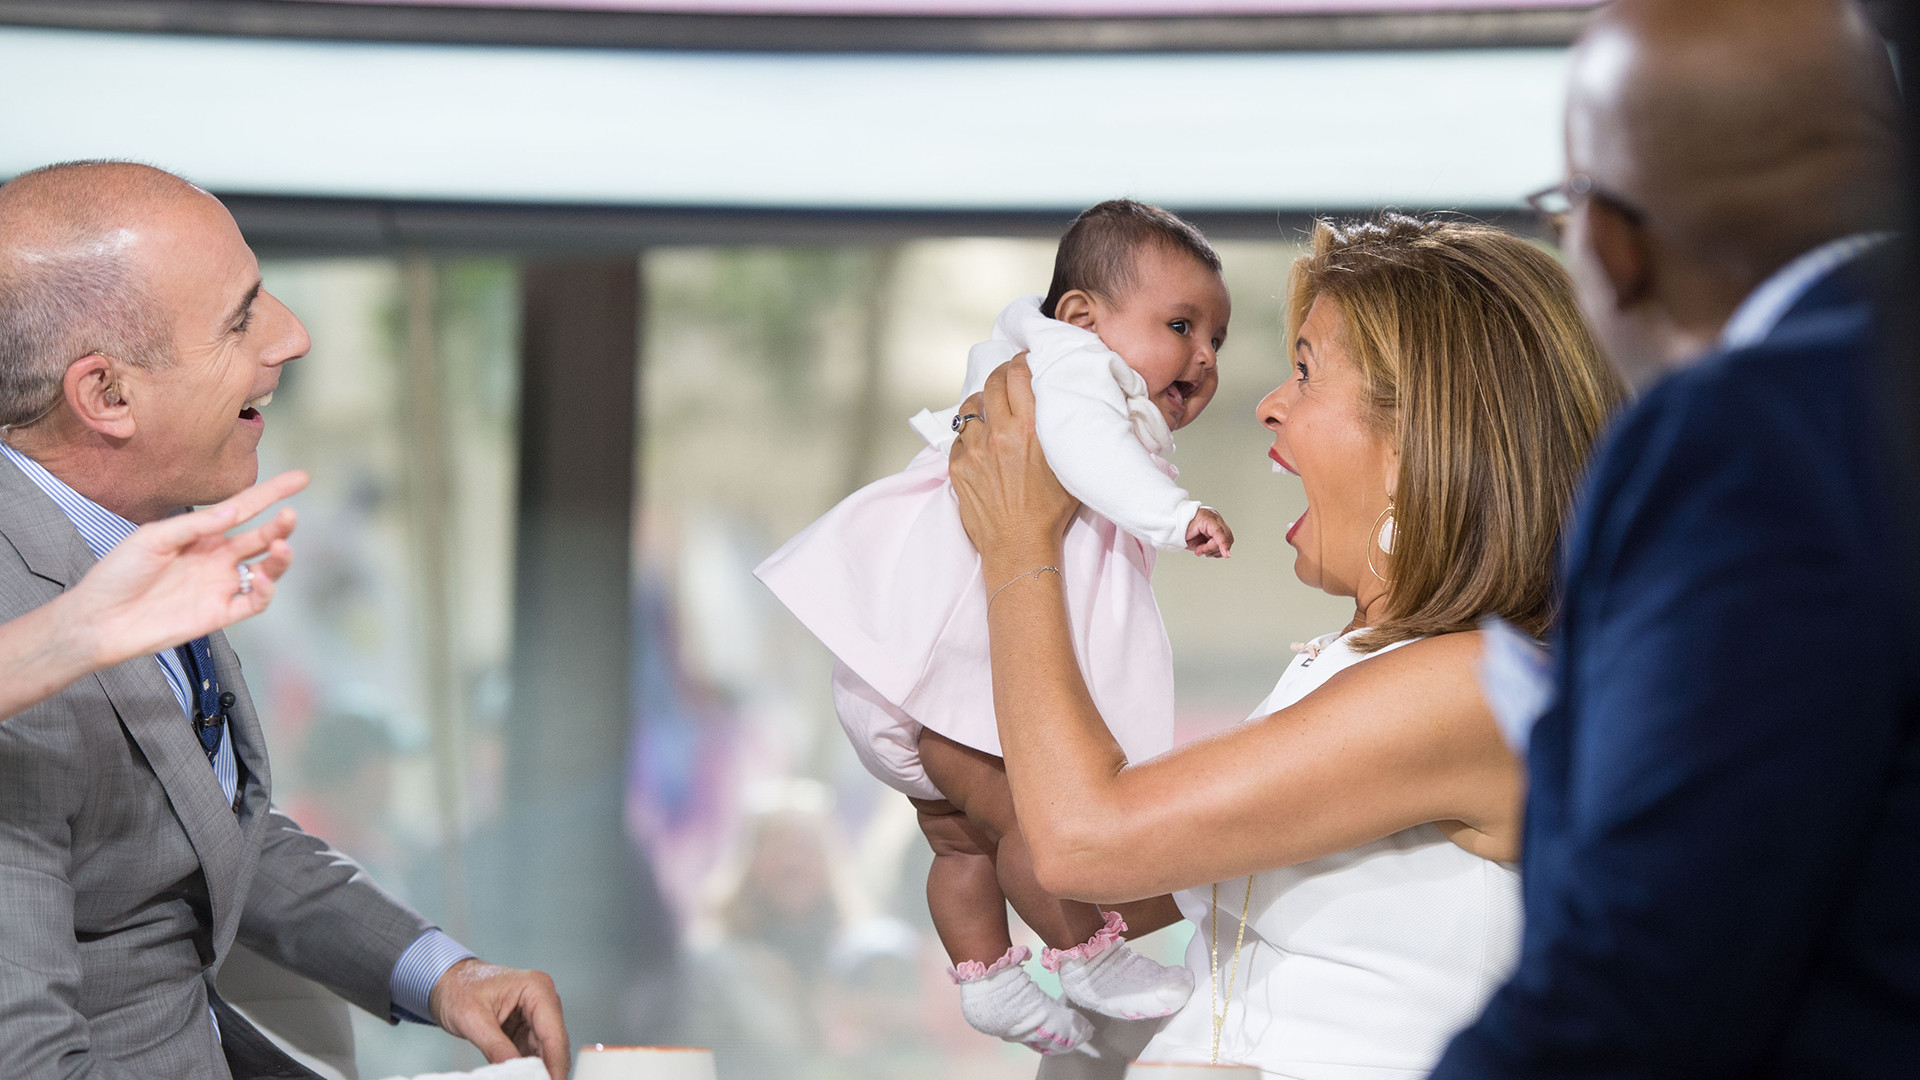 Today Show Mother's Day Gifts
 Surprise Haley Joy pays Mother s Day visit to mom Hoda